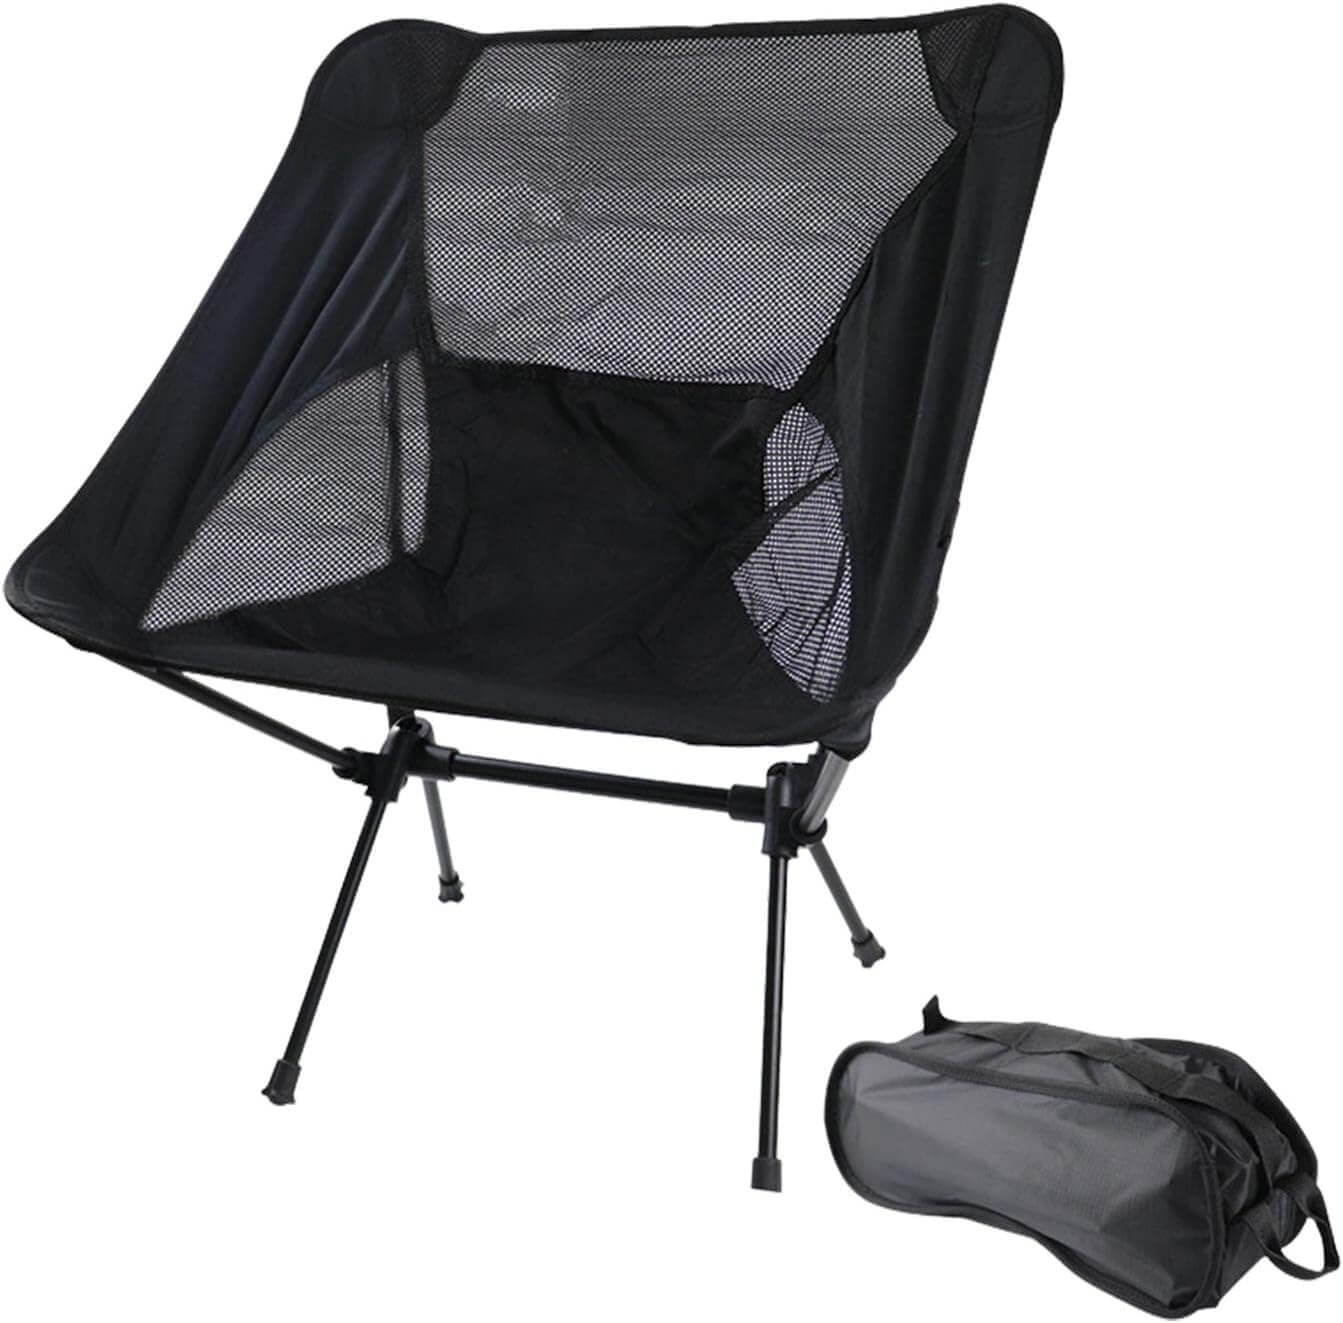 Camping Chair/Outdoor Folding Chair-Black - The Shopsite